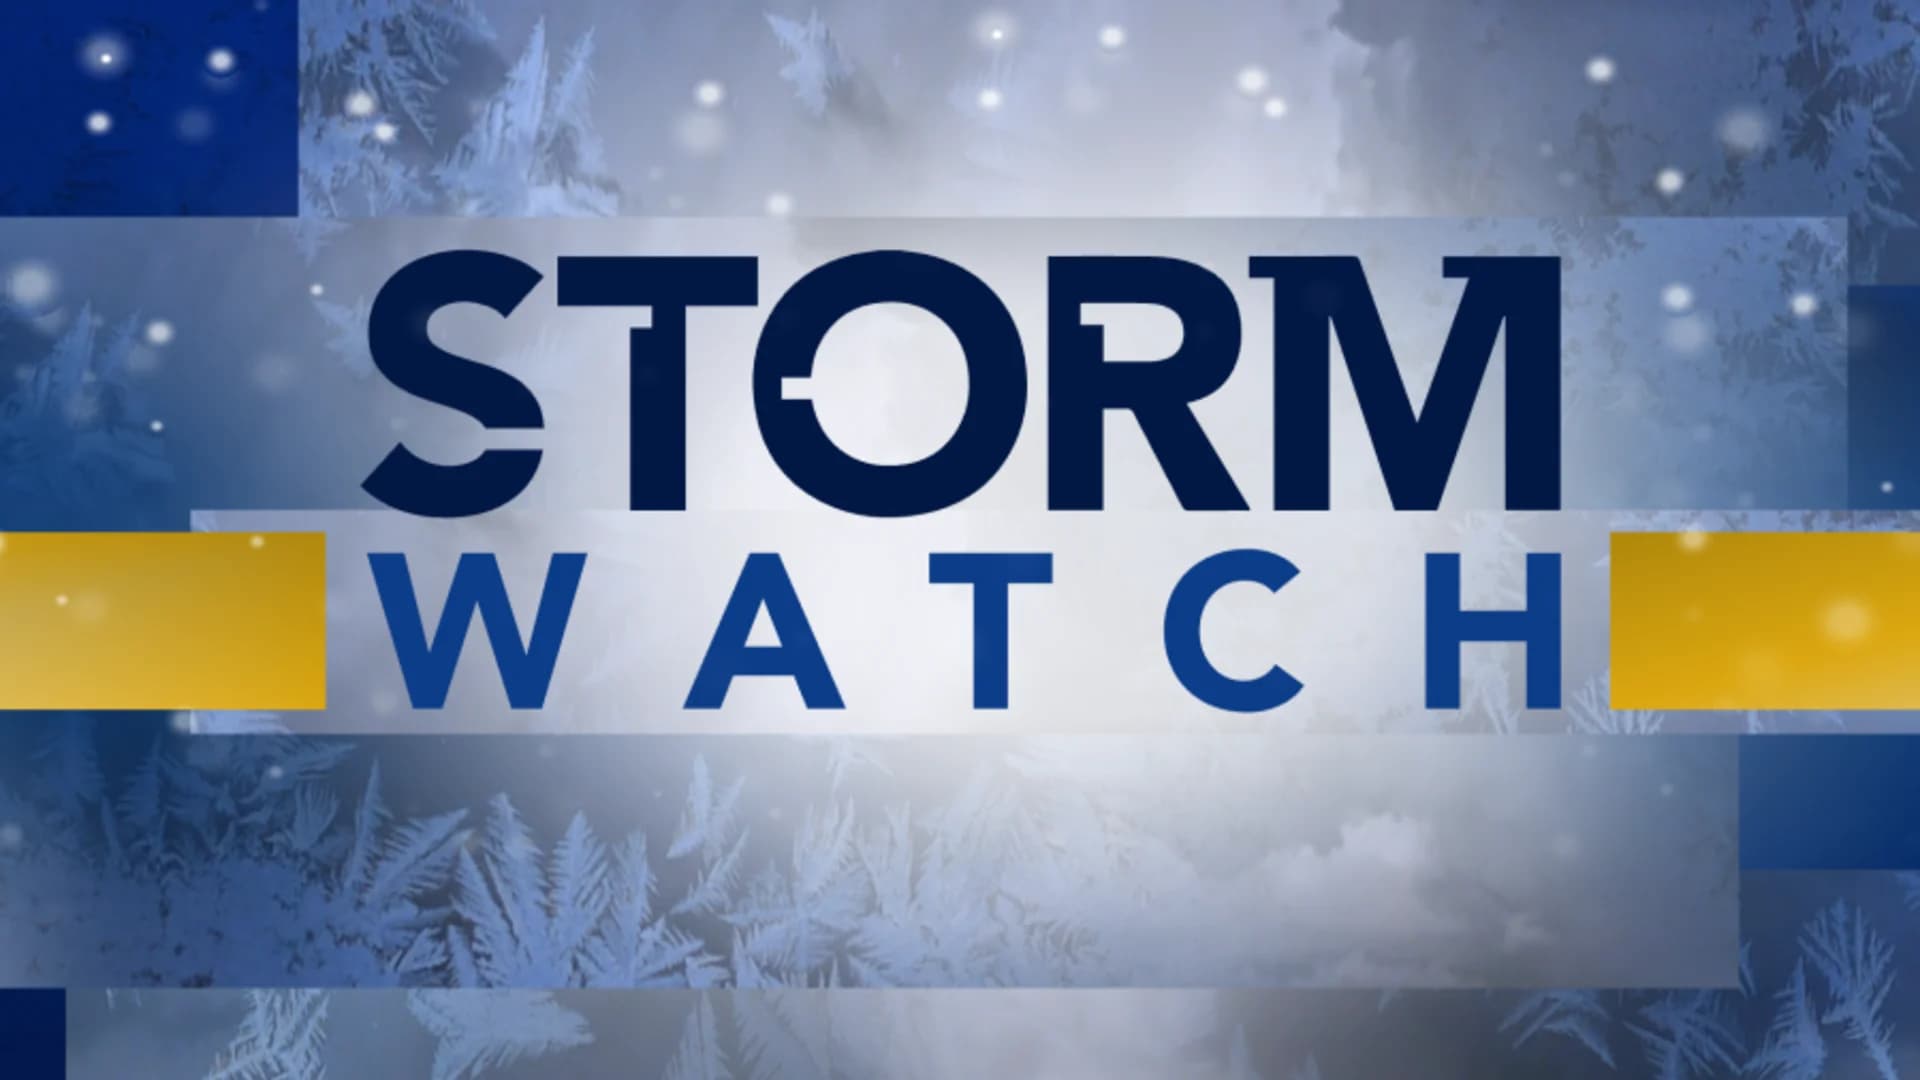 Cuomo gives update ahead of winter storm